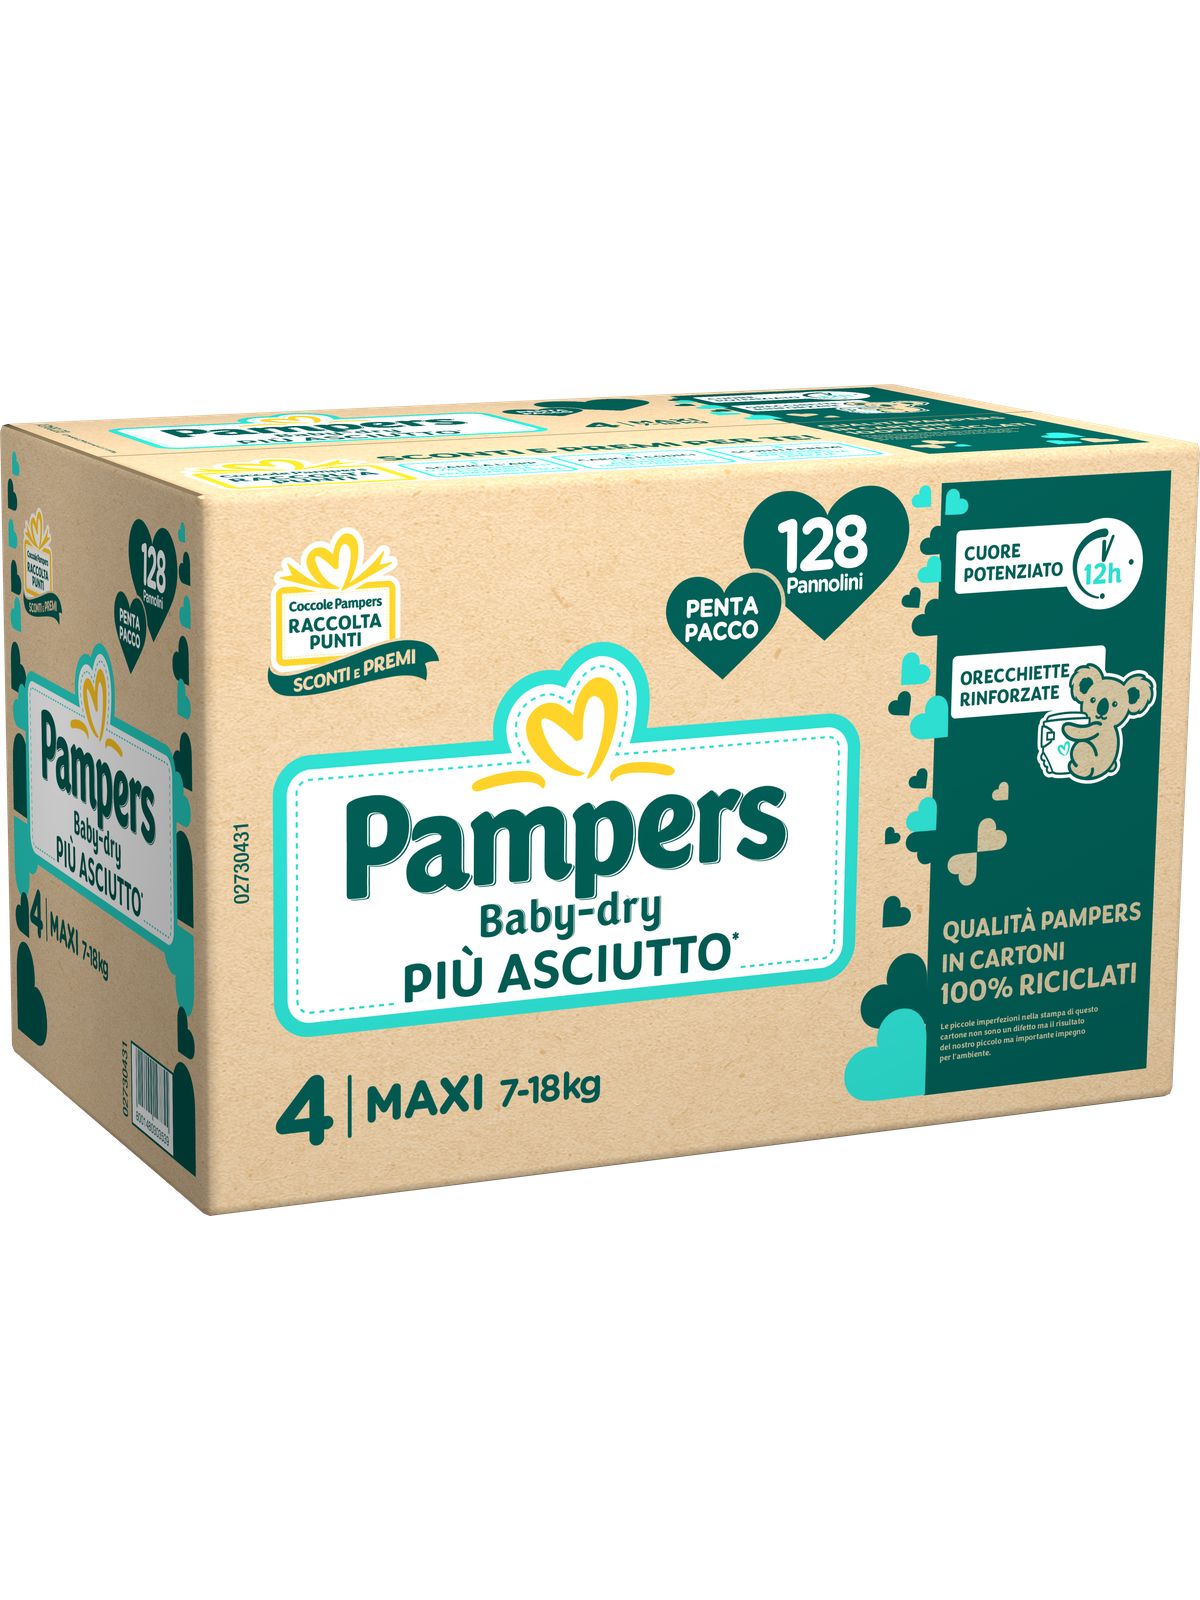 Pampers-penta baby dry  maxi x128 - Pampers